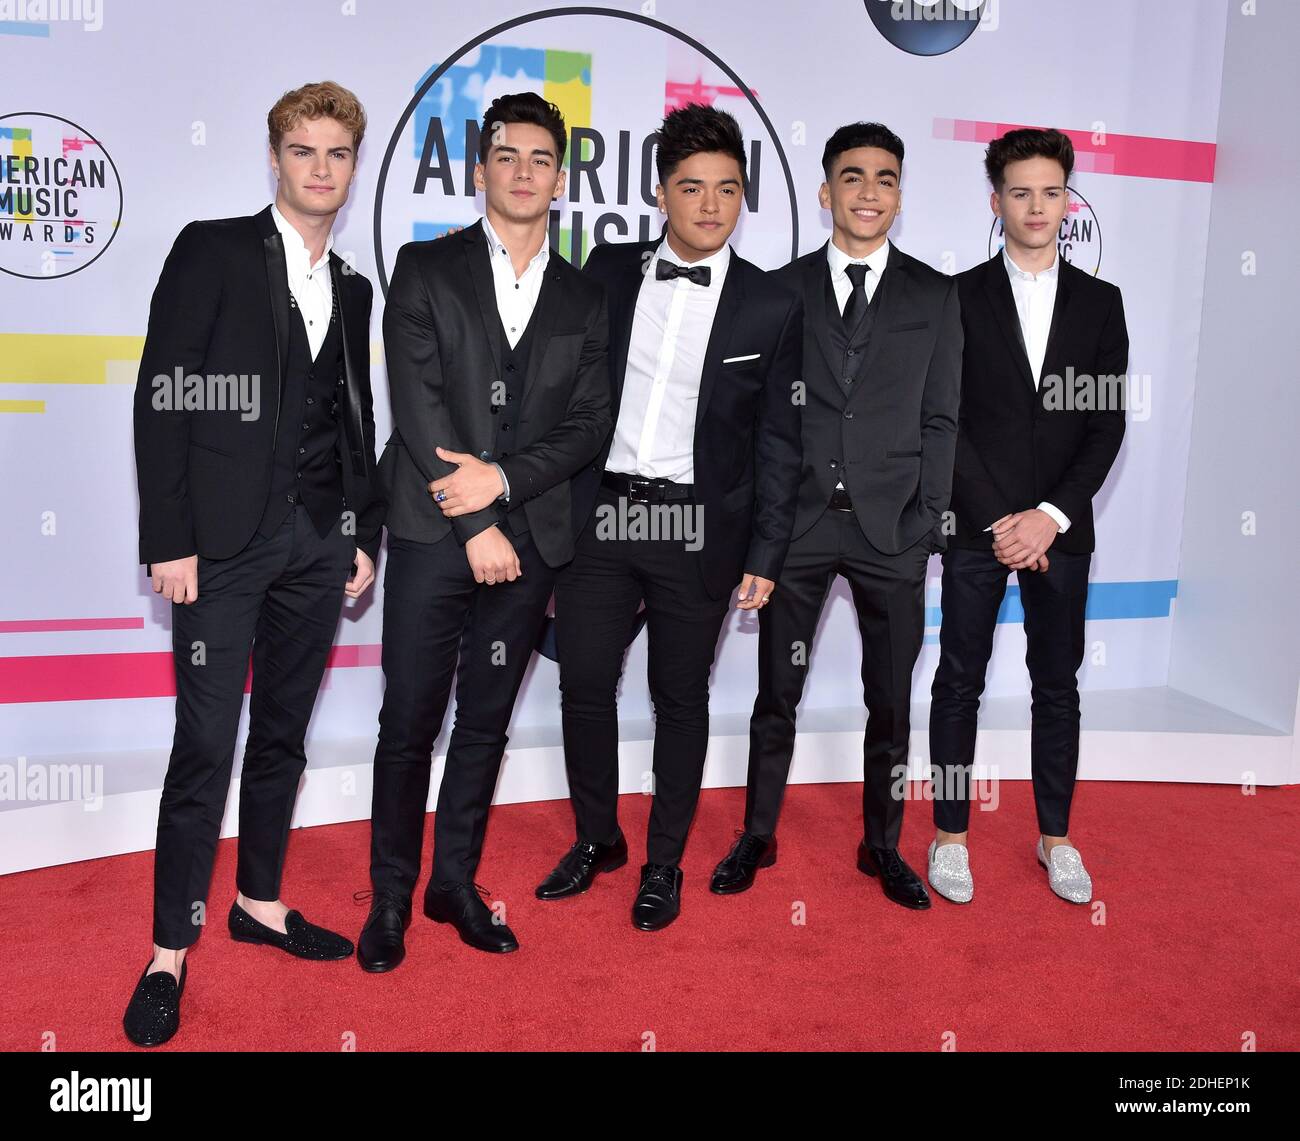 Brady Tutton, Chance Perez, Sergio Calderon Jr., Drew Ramos, and Michael Conor of the band In Real Life attend the 2017 American Music Awards at Microsoft Theater on November 19, 2017 in Los Angeles, California. Photo by Lionel Hahn/AbacaPress.com Stock Photo